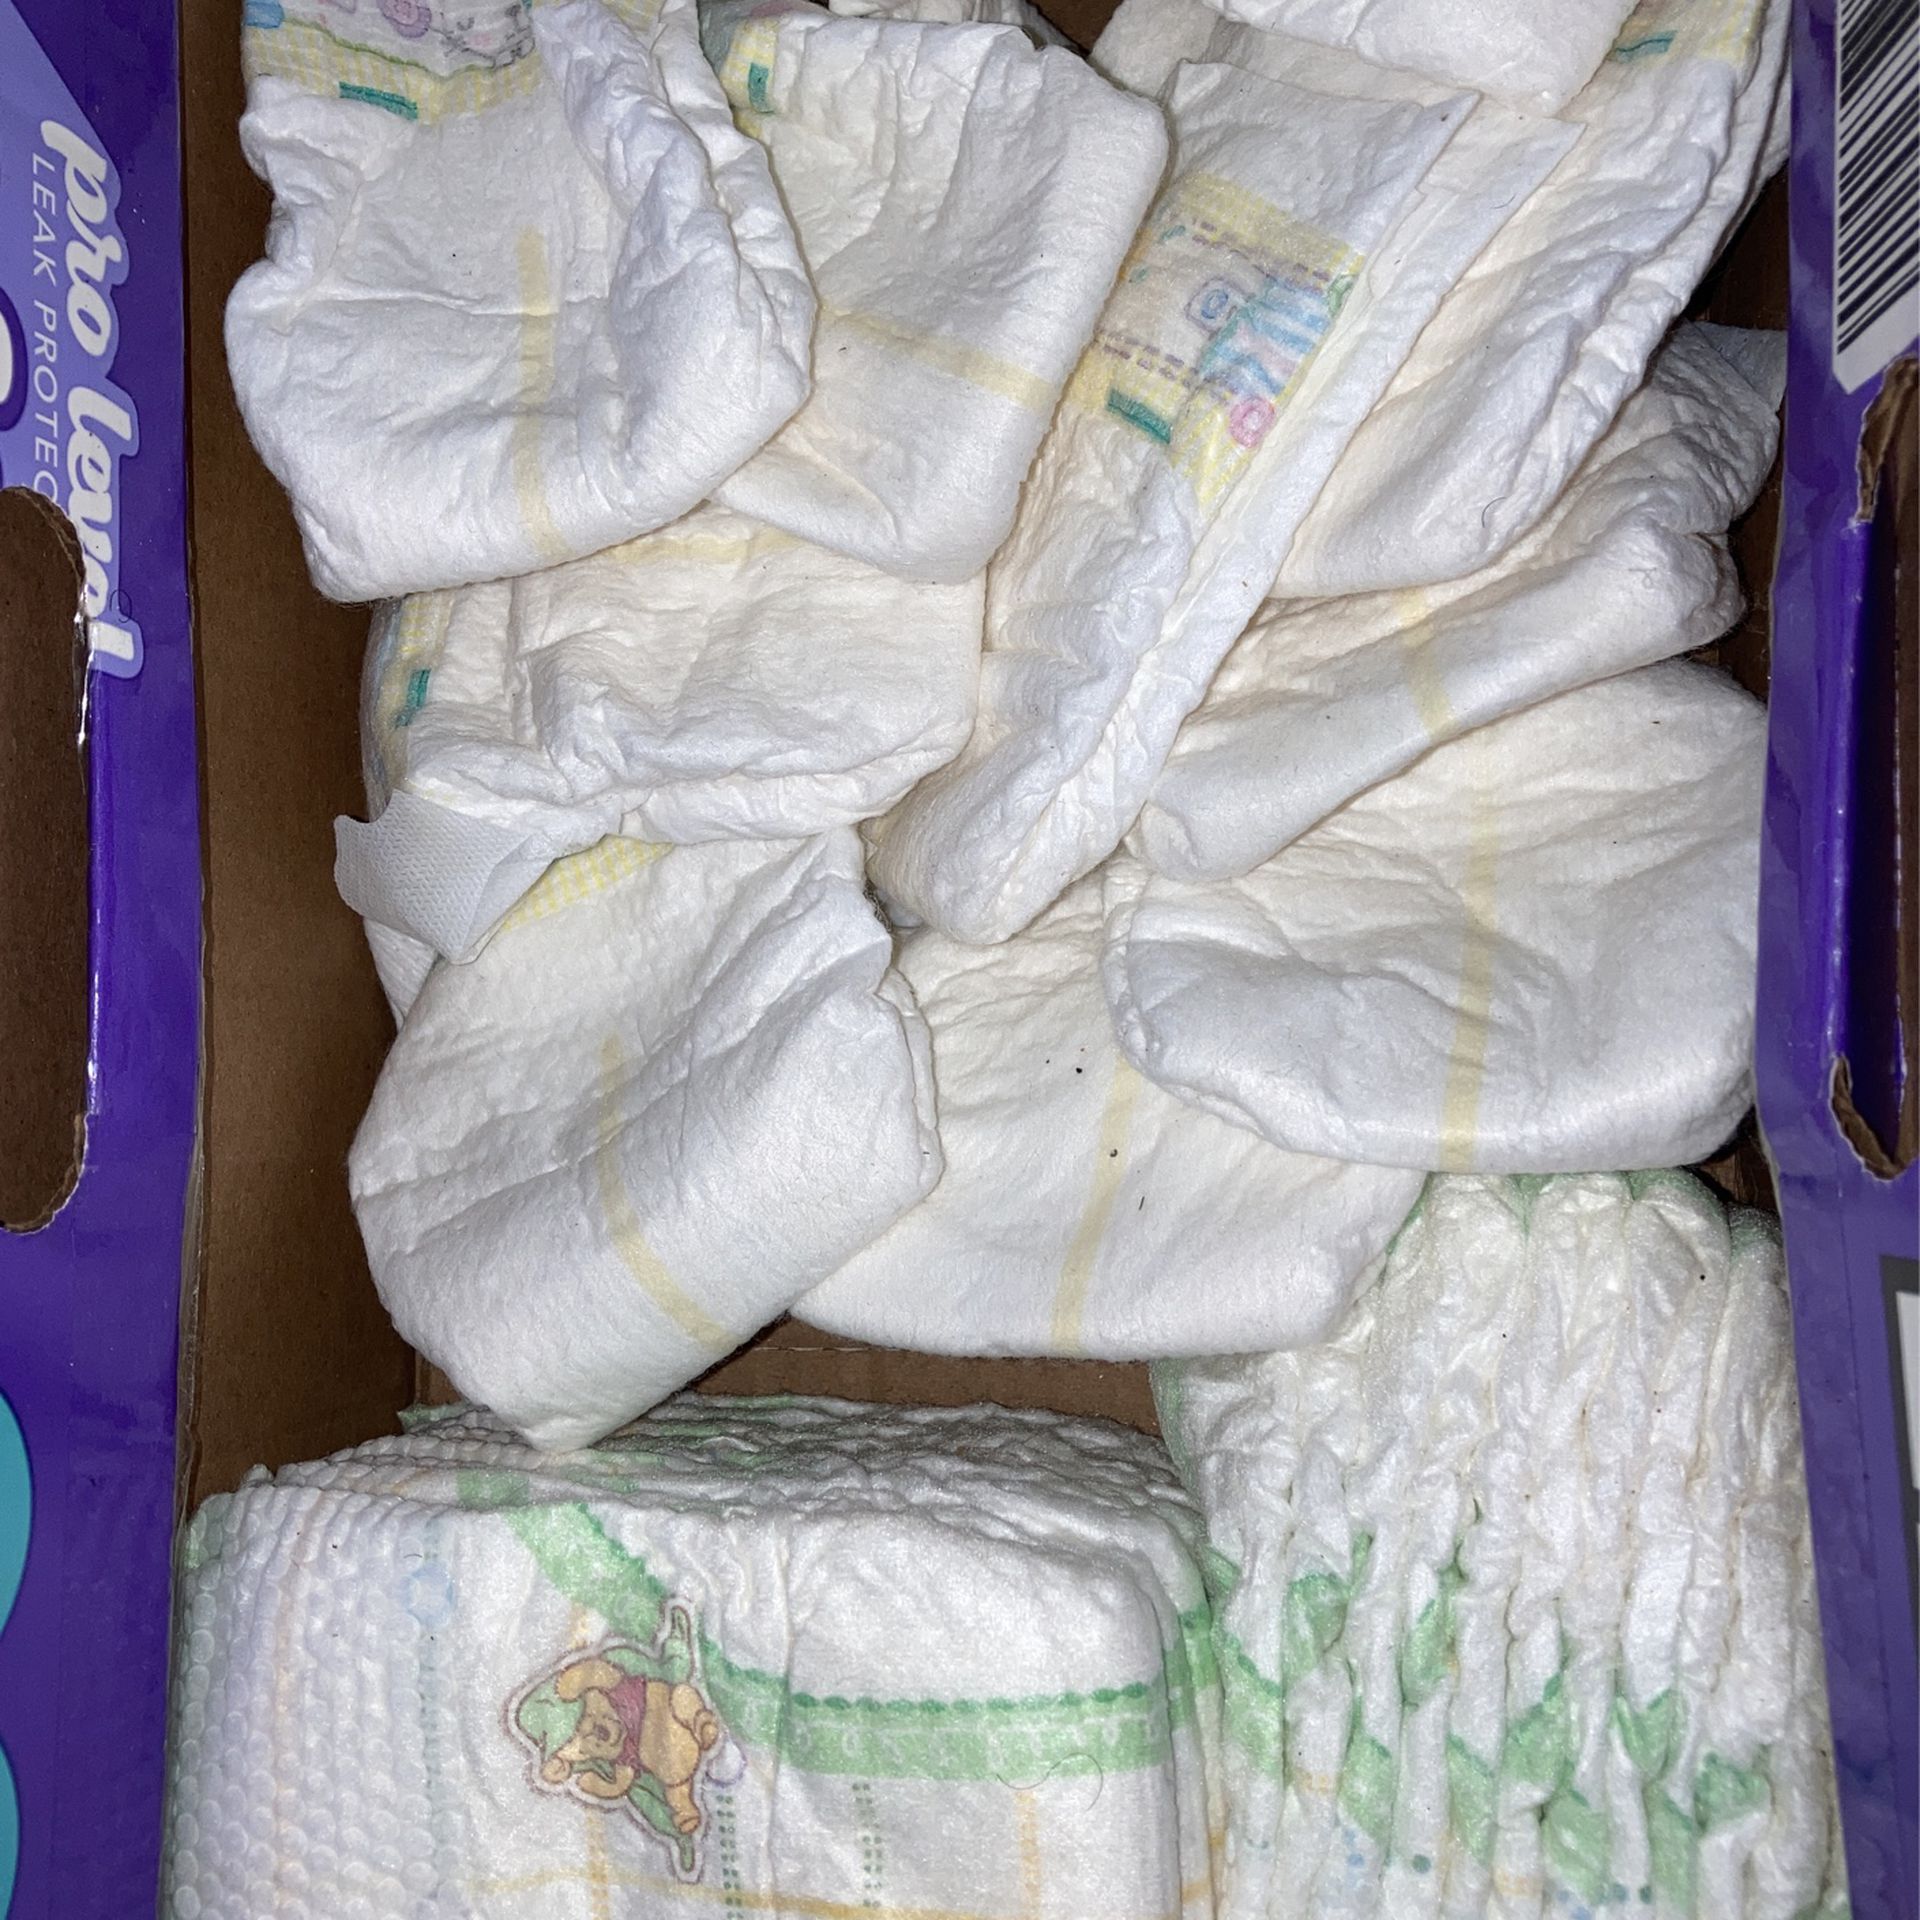 BranbrSmall Box Of Size Newborn Pampers And Huggies Brand Diapers